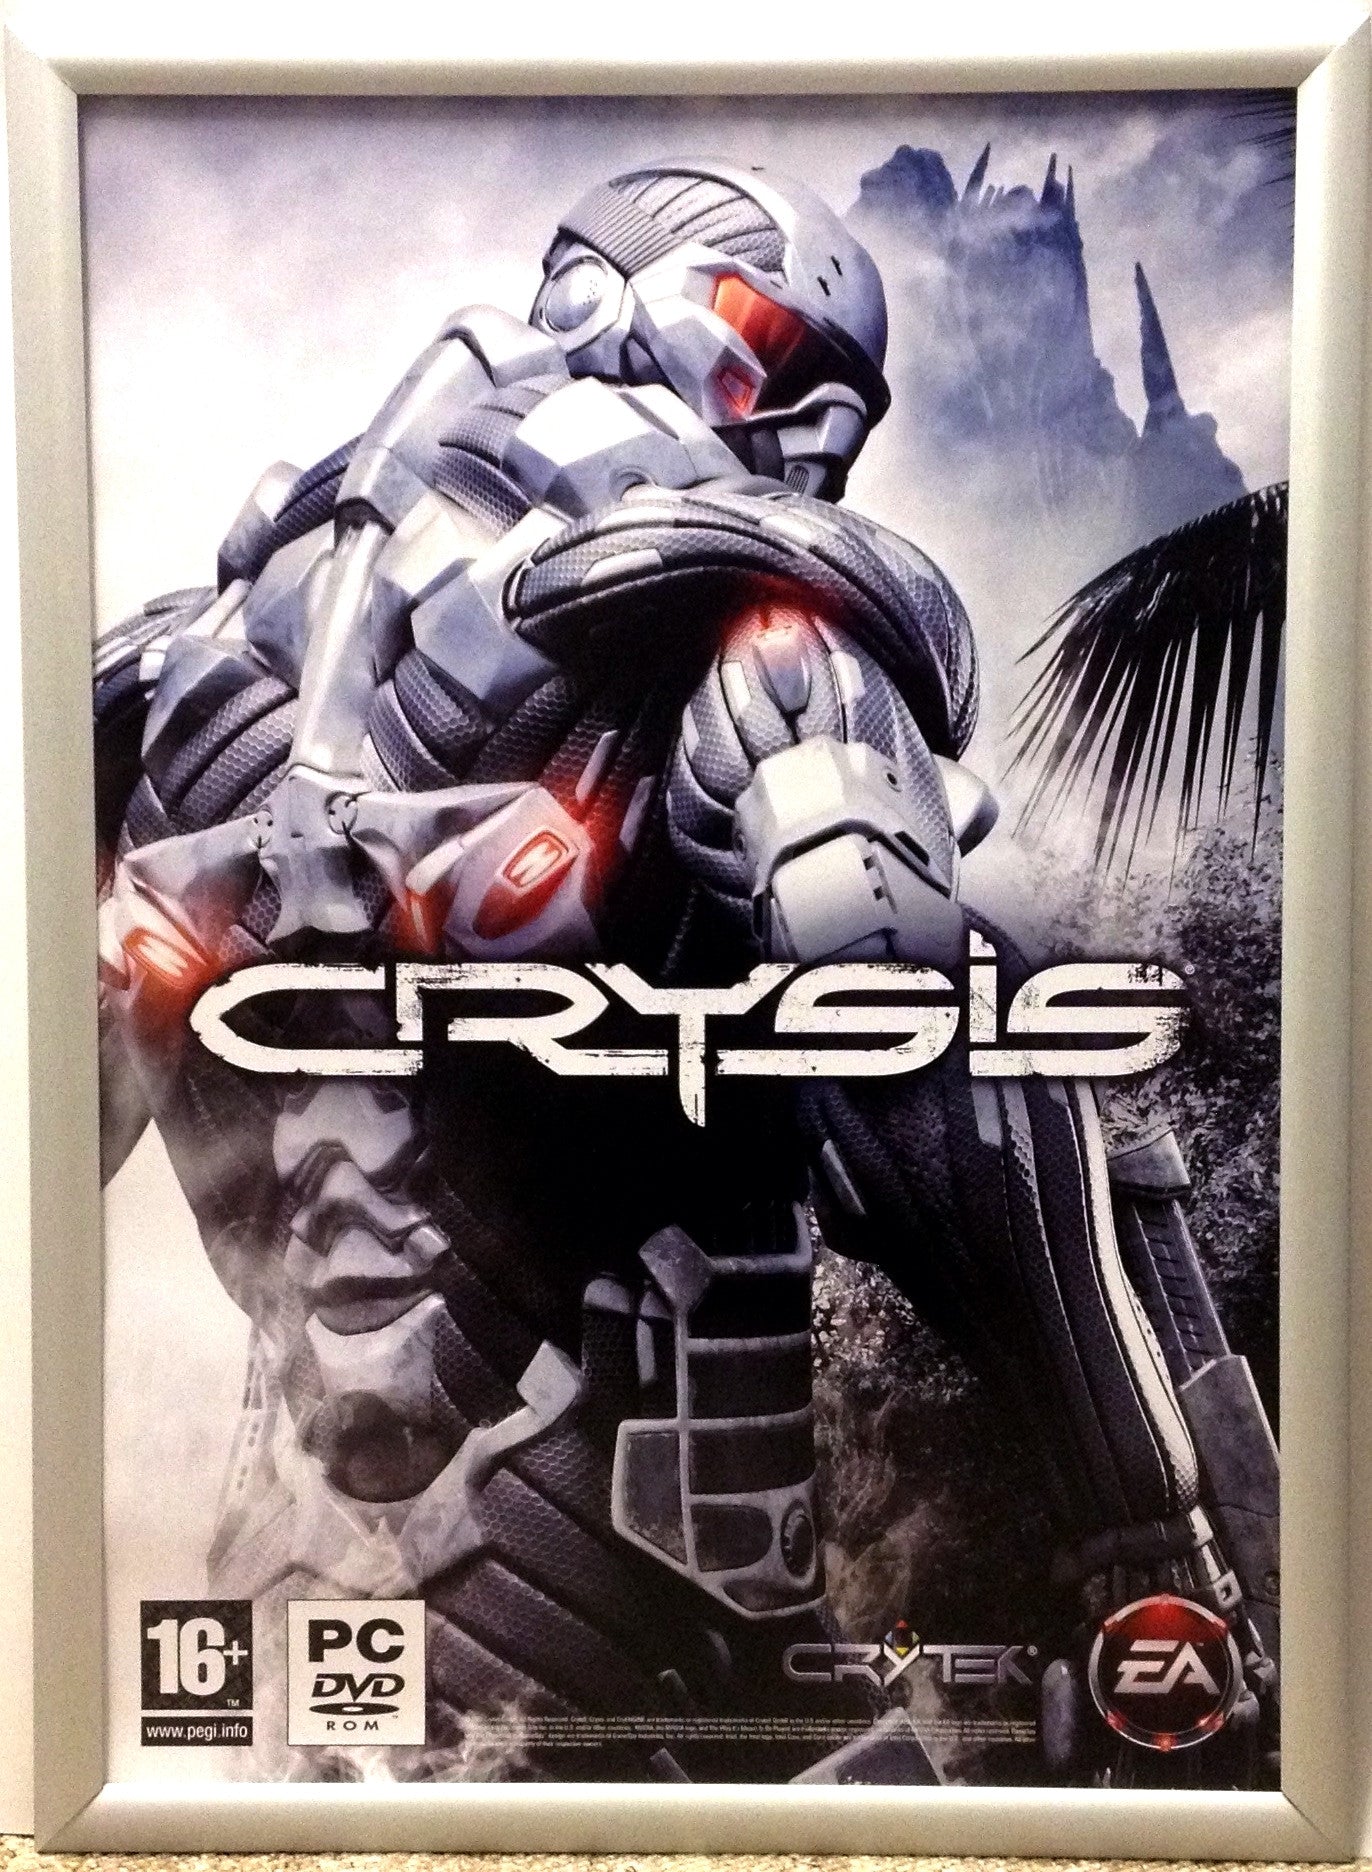 Crysis (A2) Promotional Poster